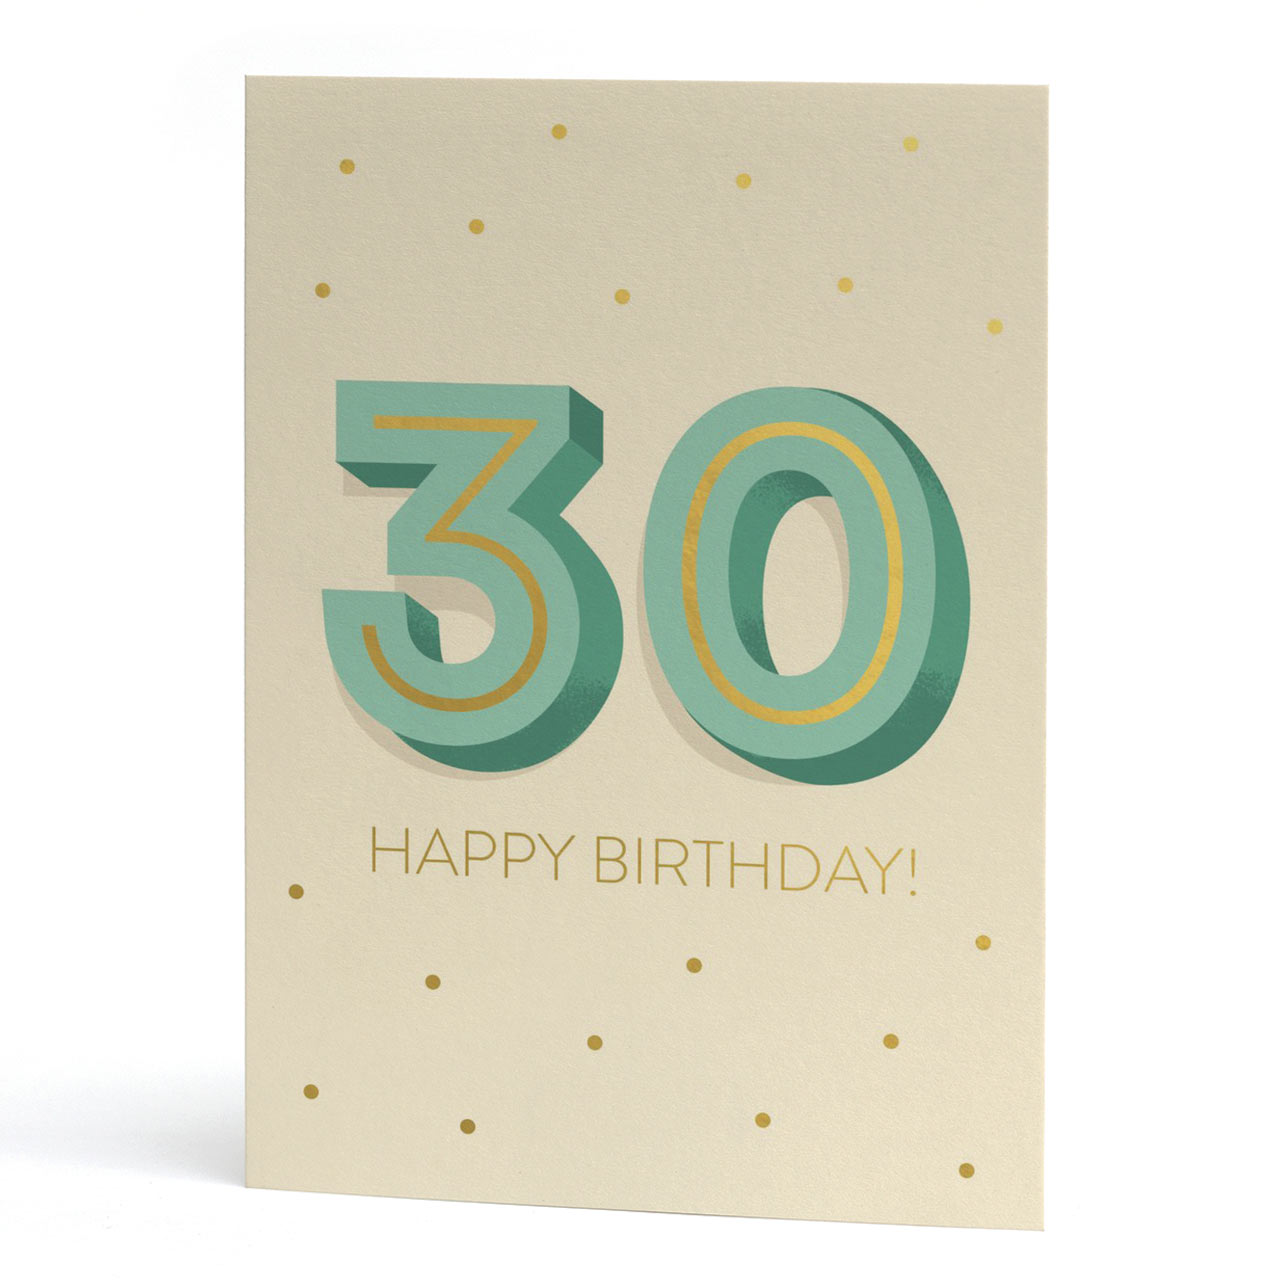 Big 30th Birthday Gold Foil Greeting Card | The Curious Pancake